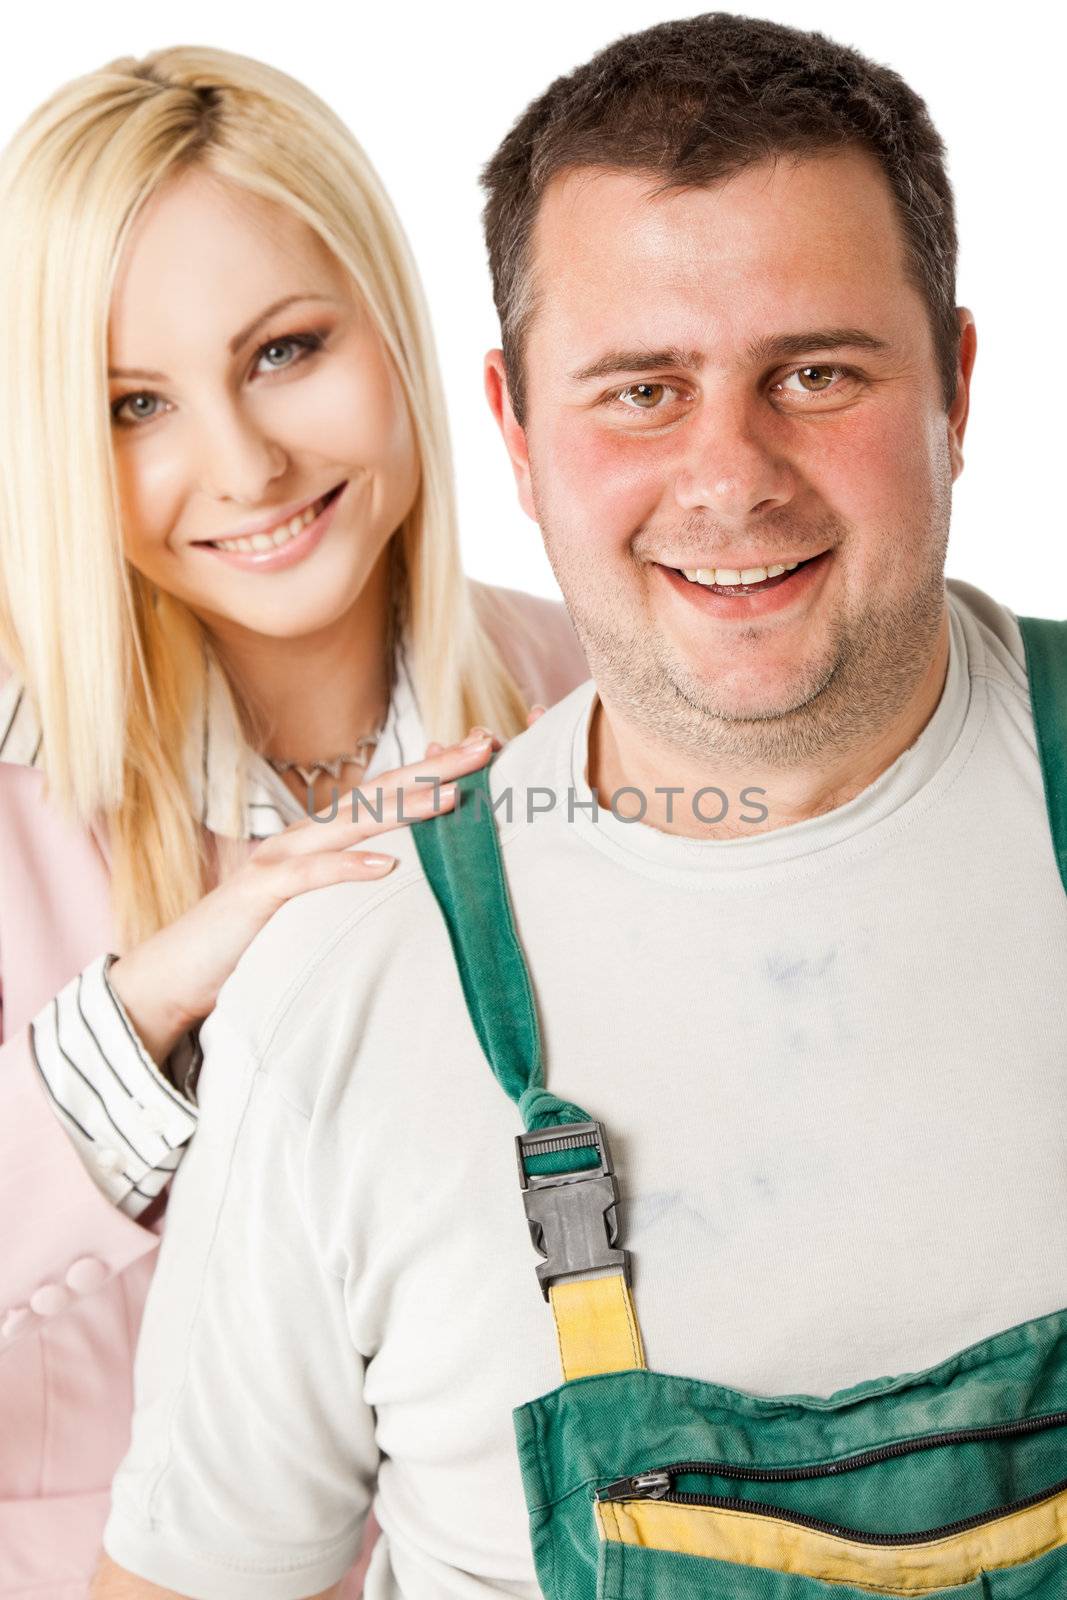 Blonde businesswoman and male construction worker smiling at camera